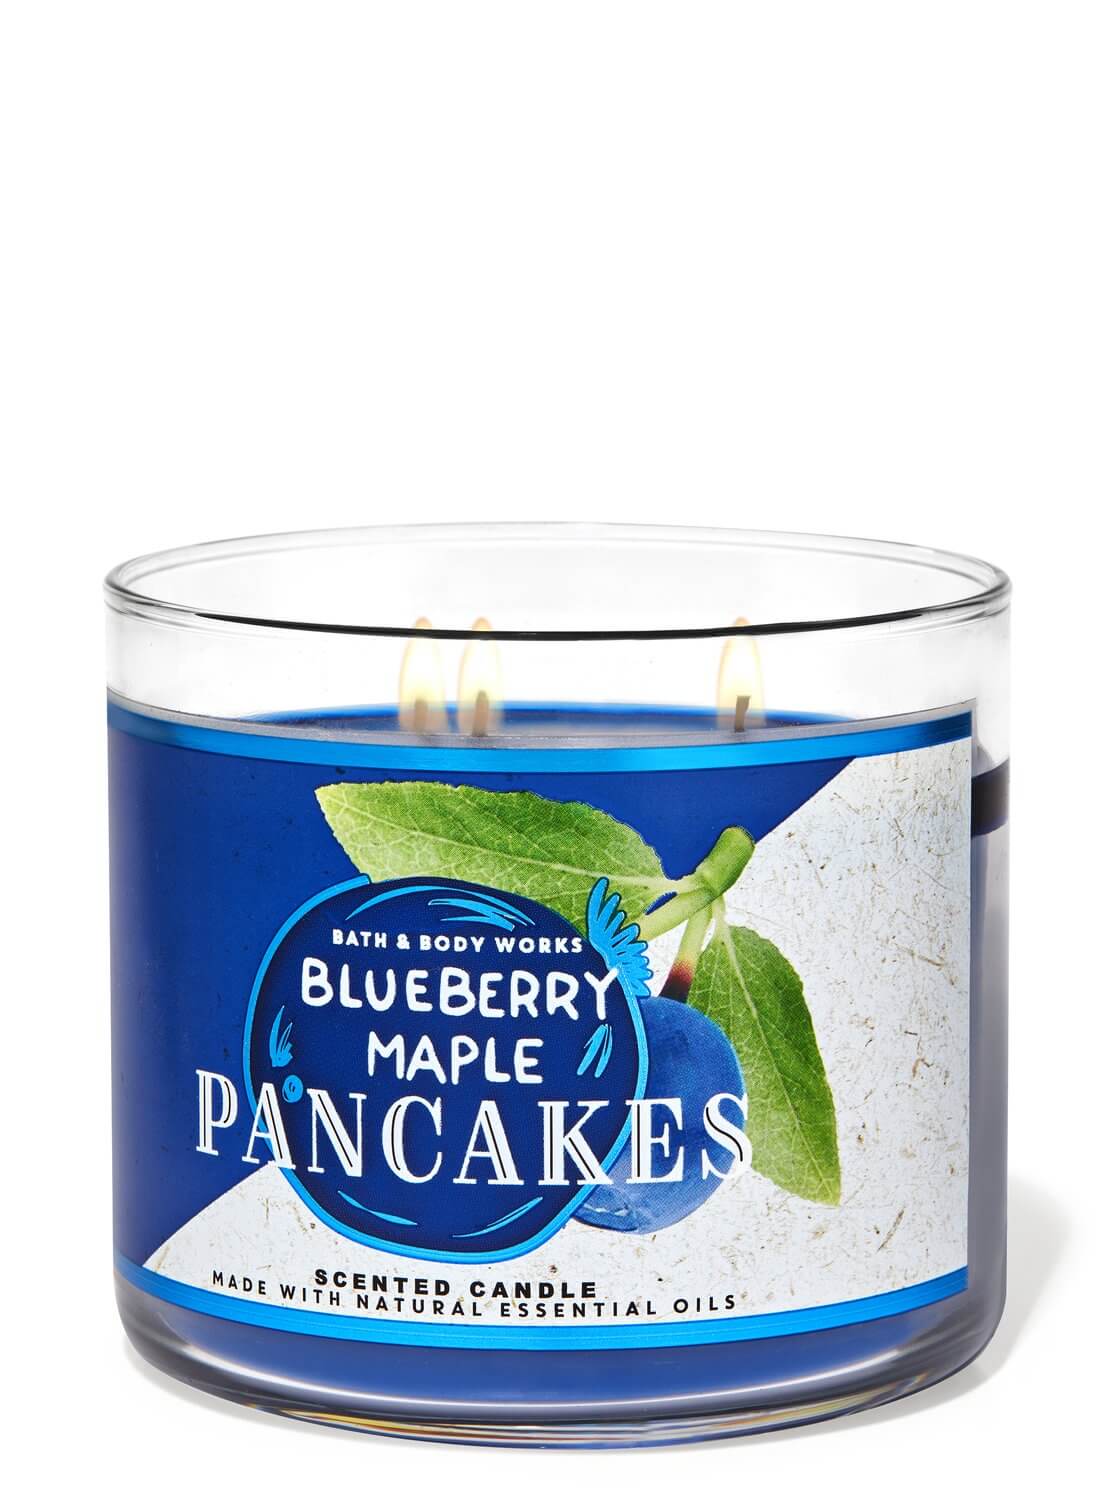 Bath & Body Works Blueberry Maple Pancakes 3-Wick Candle